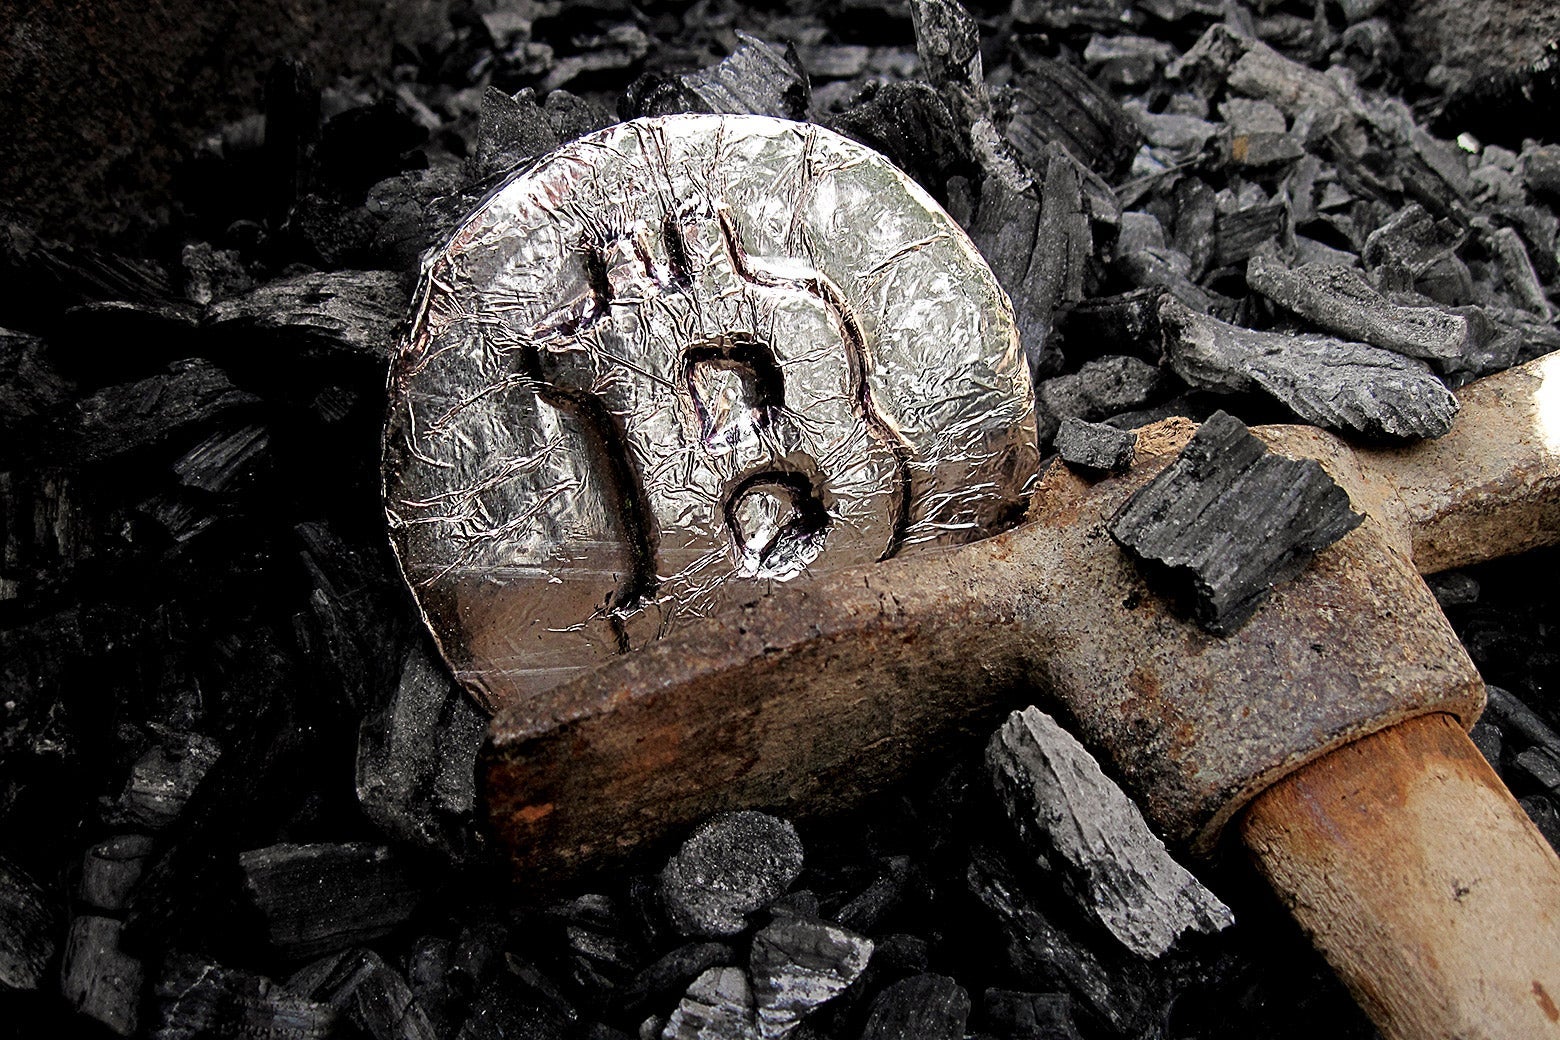 A miner's ax next to a medallion with the Bitcoin logo on it.